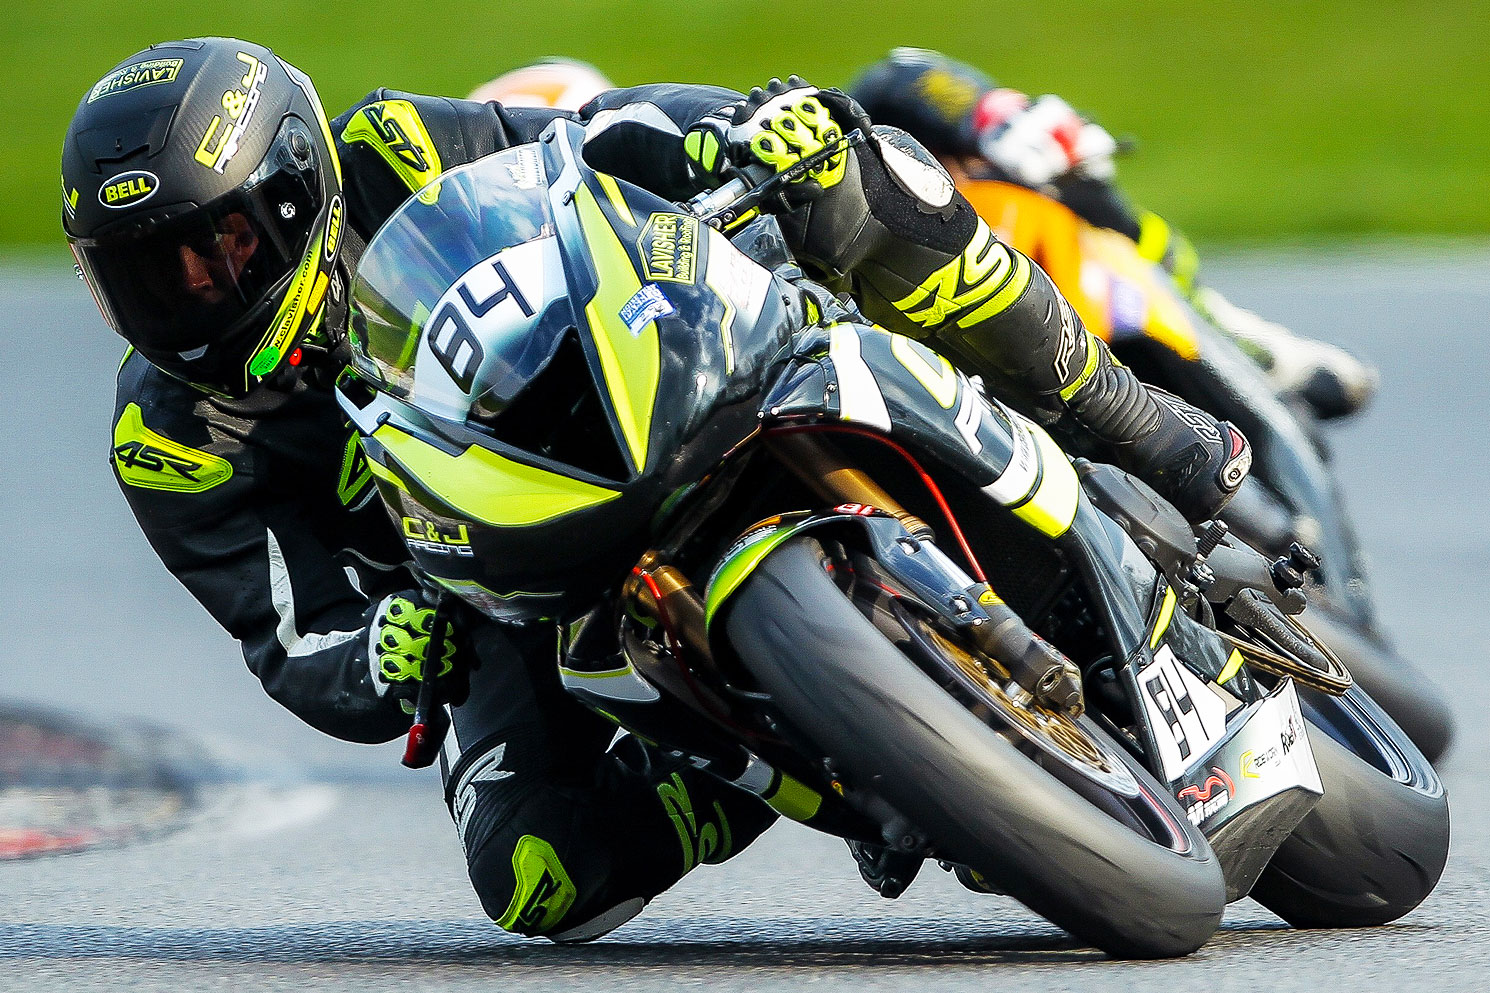 Chris Lavisher riding for C and J Motorcycle Racing Team